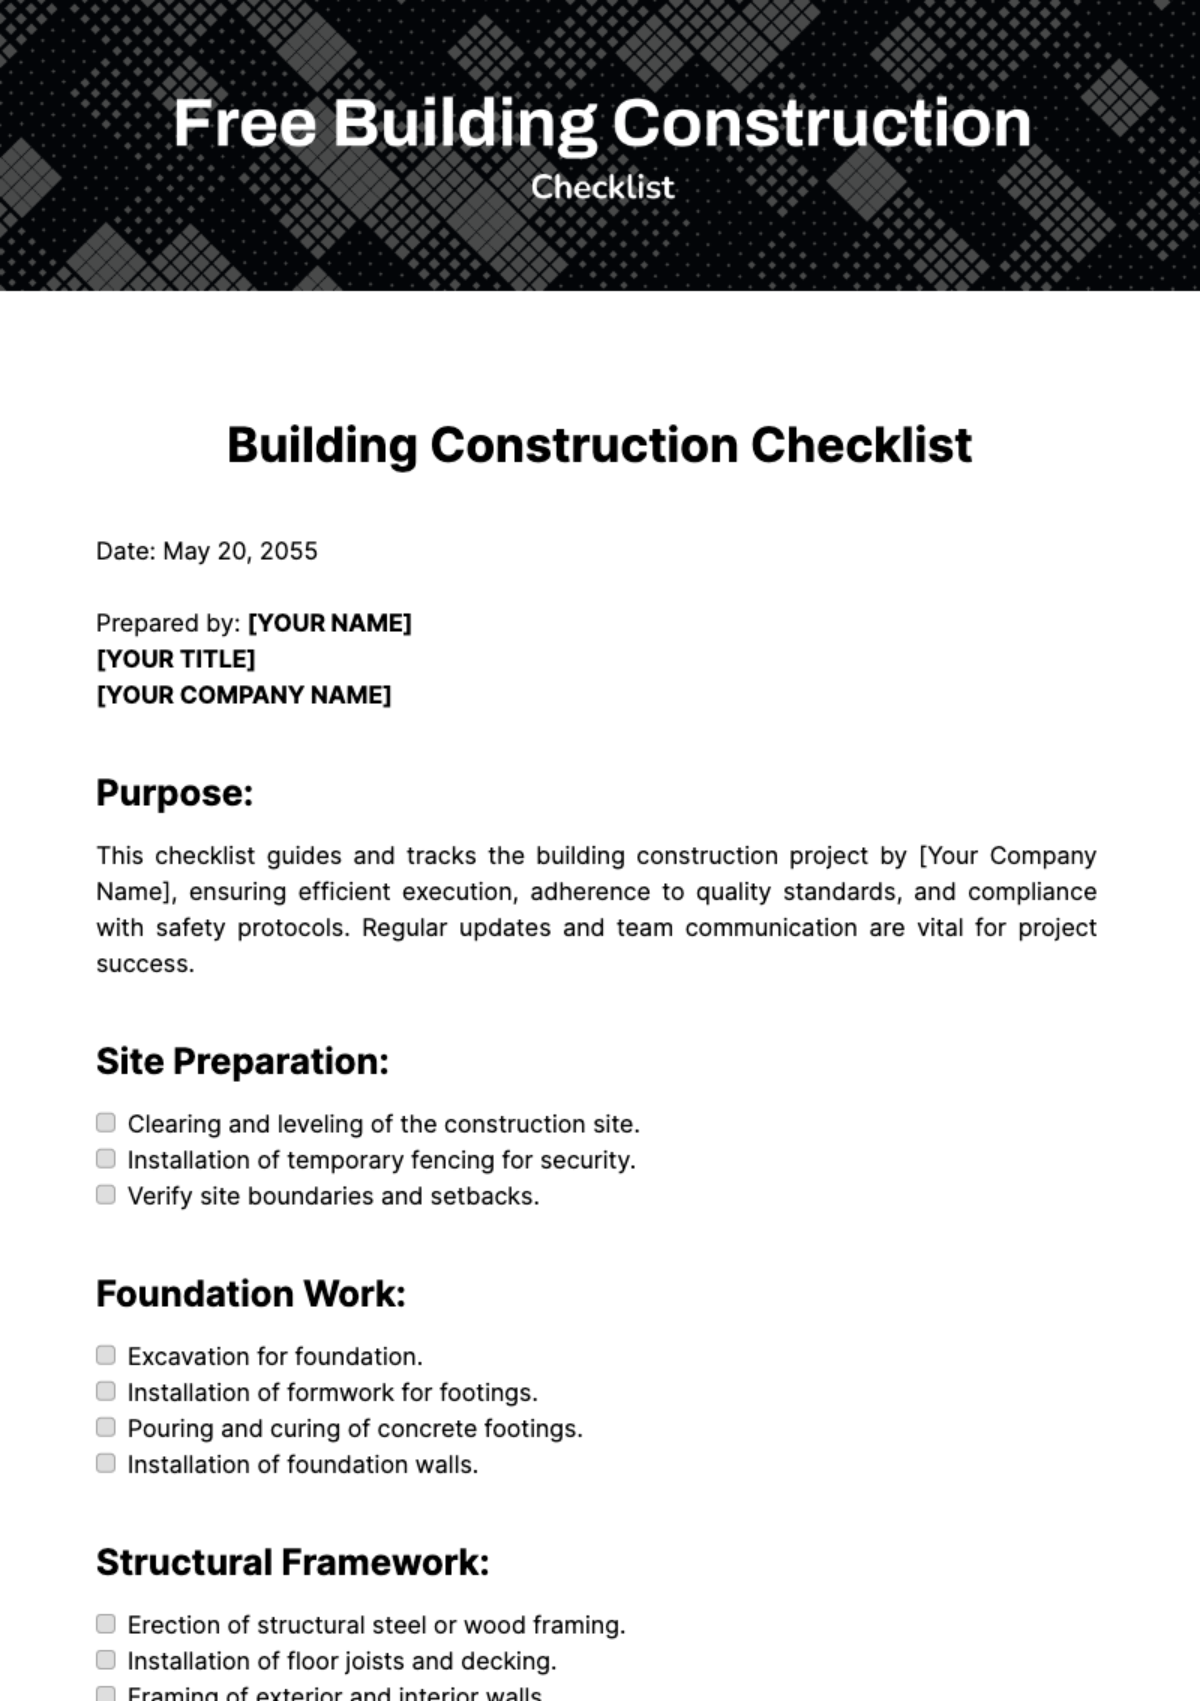 Free Building Construction Checklist Template